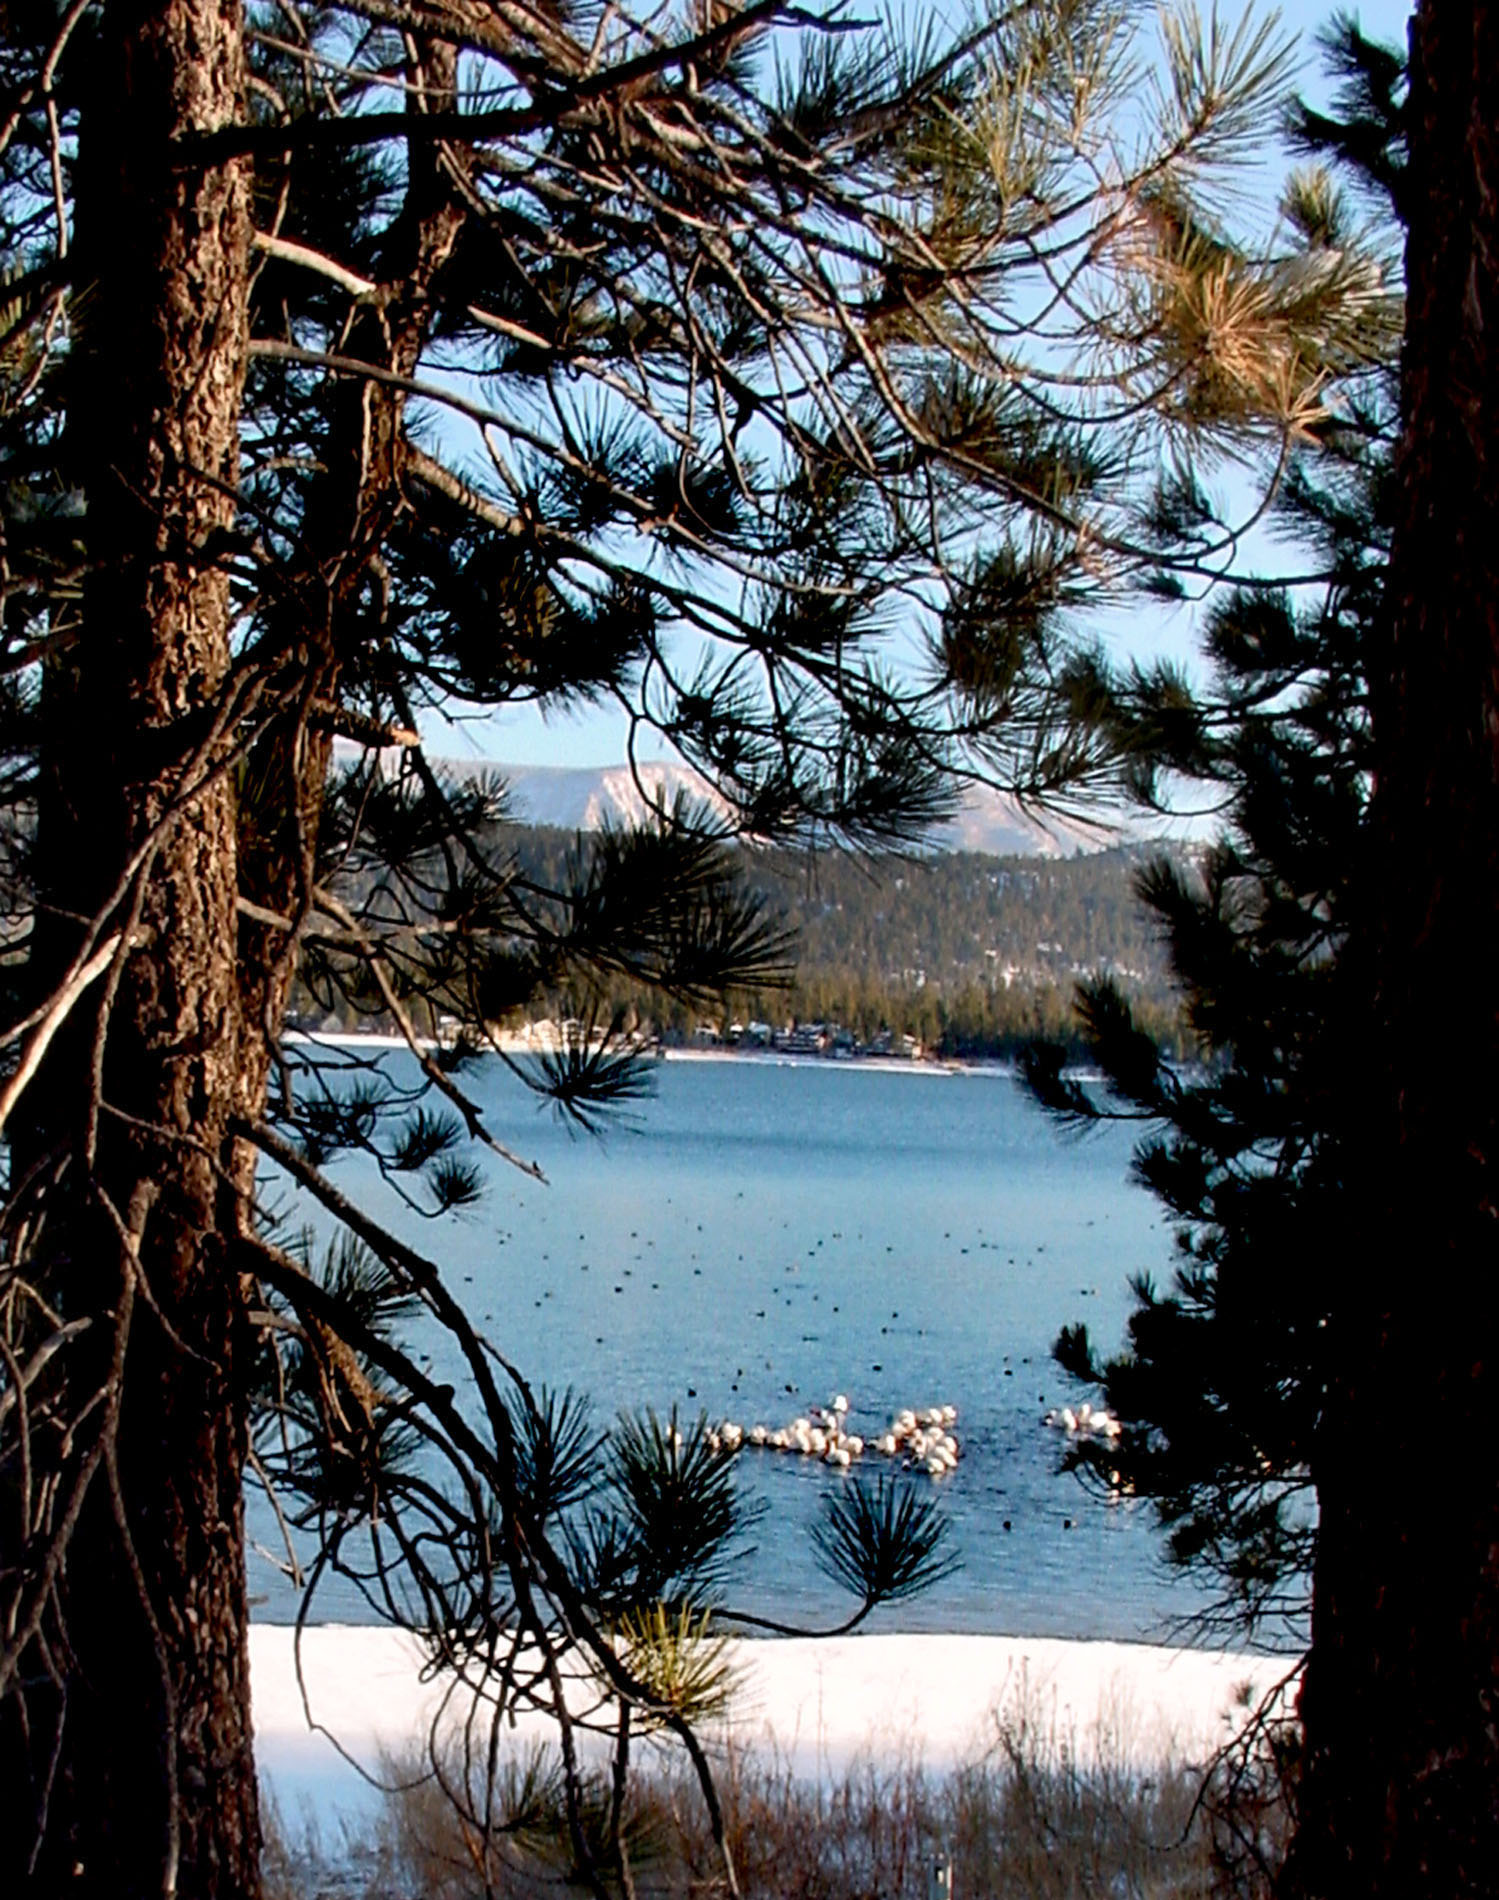 View of Big Bear Lake from proposed Moon Camp site